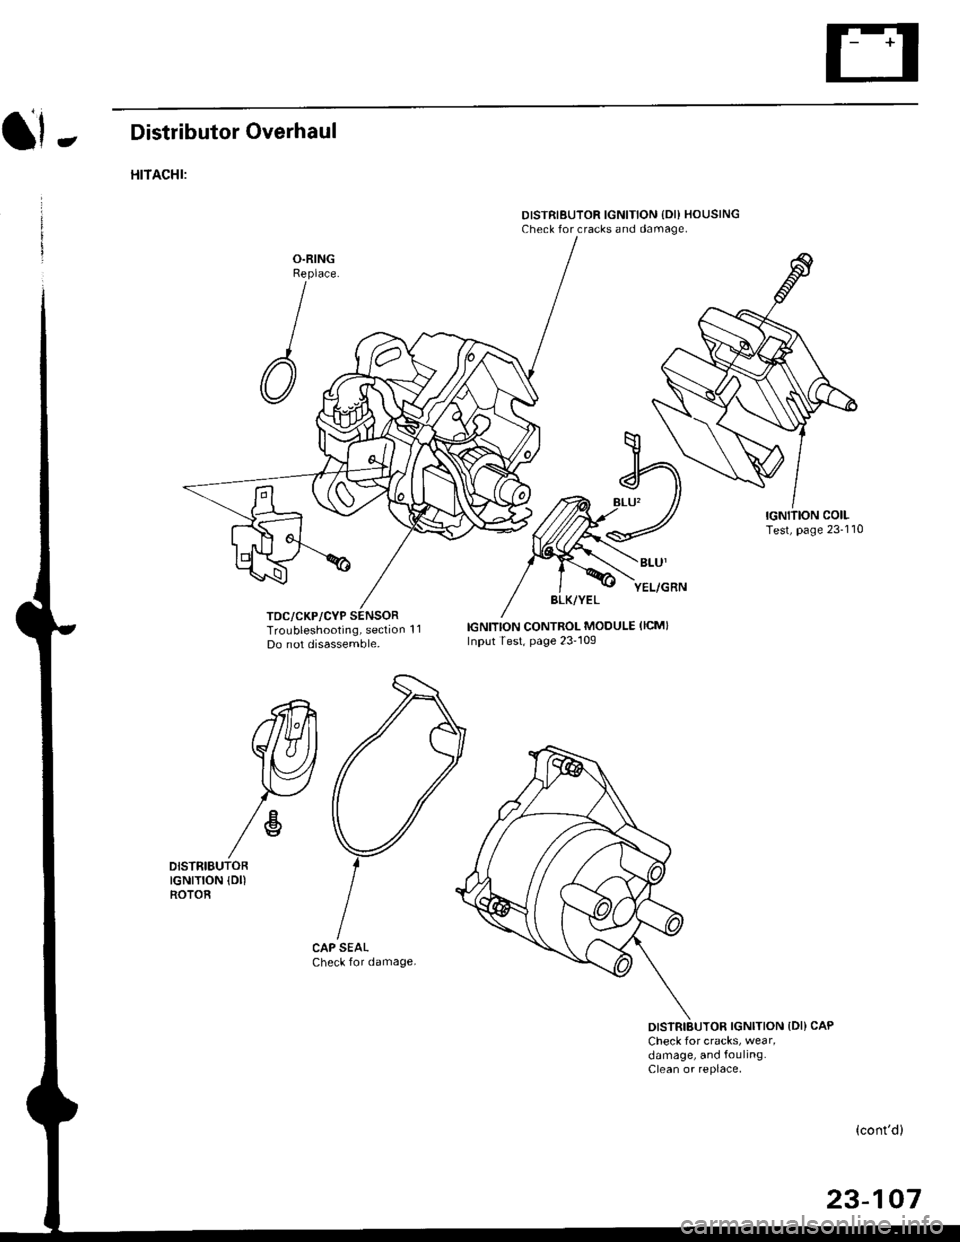 HONDA CIVIC 1996 6.G Workshop Manual el -Distributor Overhaul
HITACHI:
TOC/CKP/CYP
DISTRIBUTOR IGNITION {DI} HOUSINGCheck for cracks and damage.
Troubleshooting, section 1 1
Do not disassemble.
CAP SEALCheck for damage.
IGNITION CONTROL 